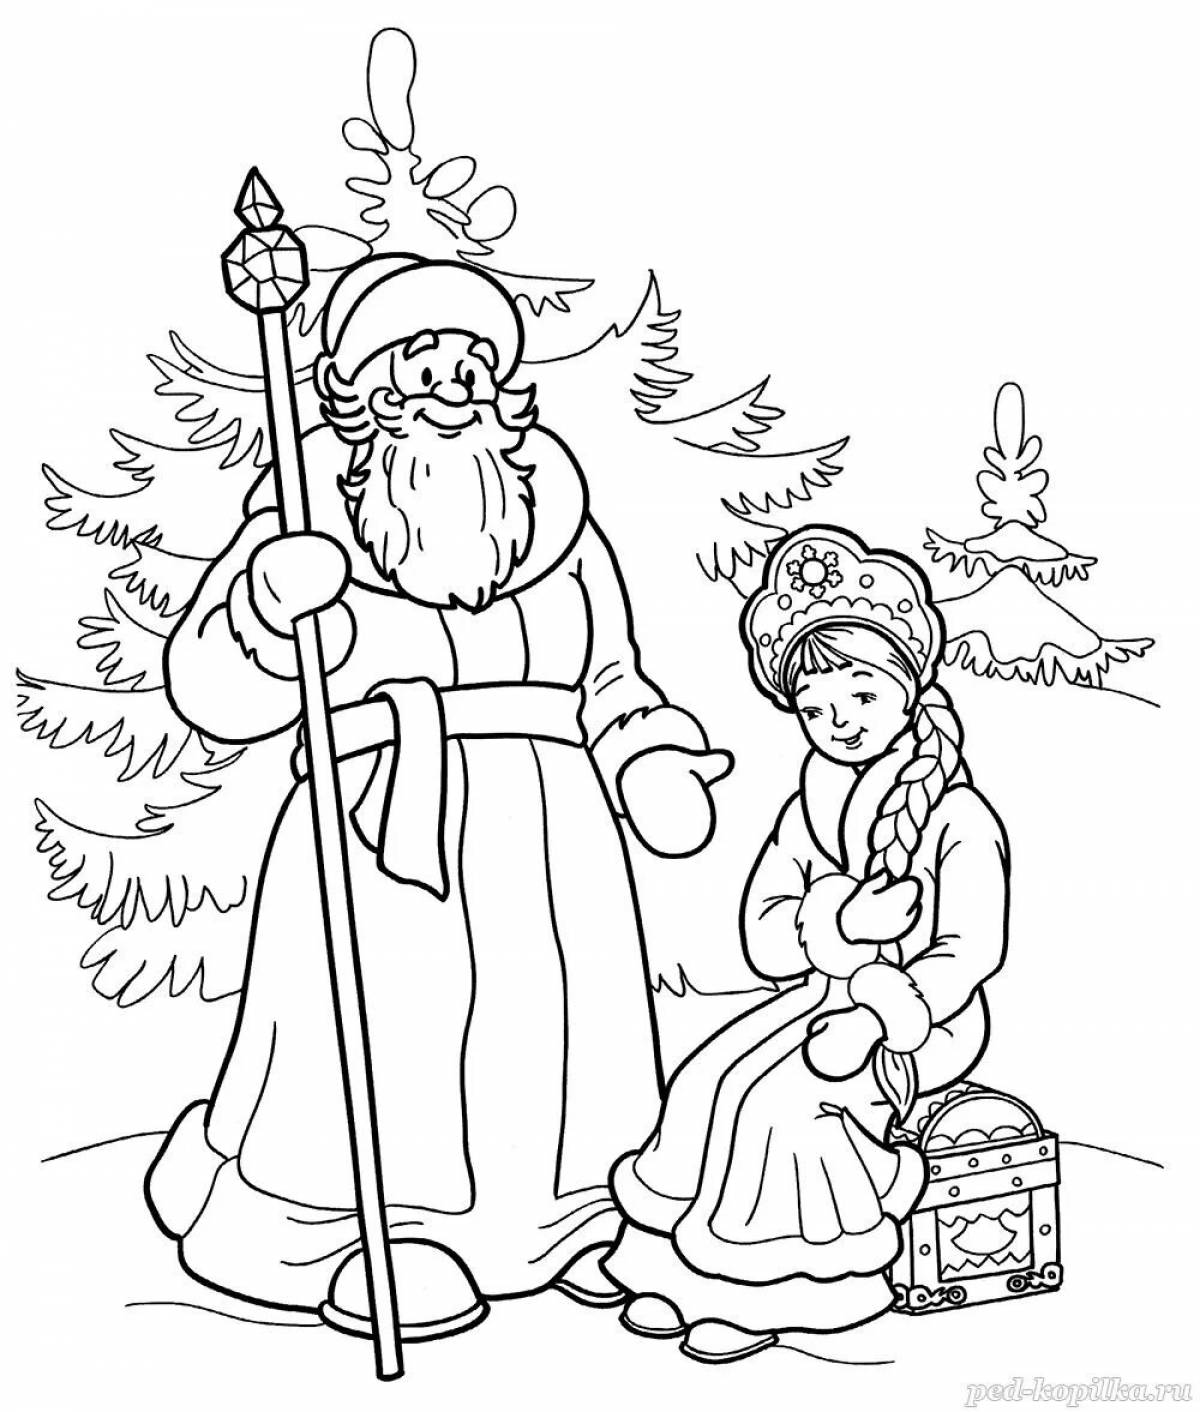 Exotic snow maiden coloring book